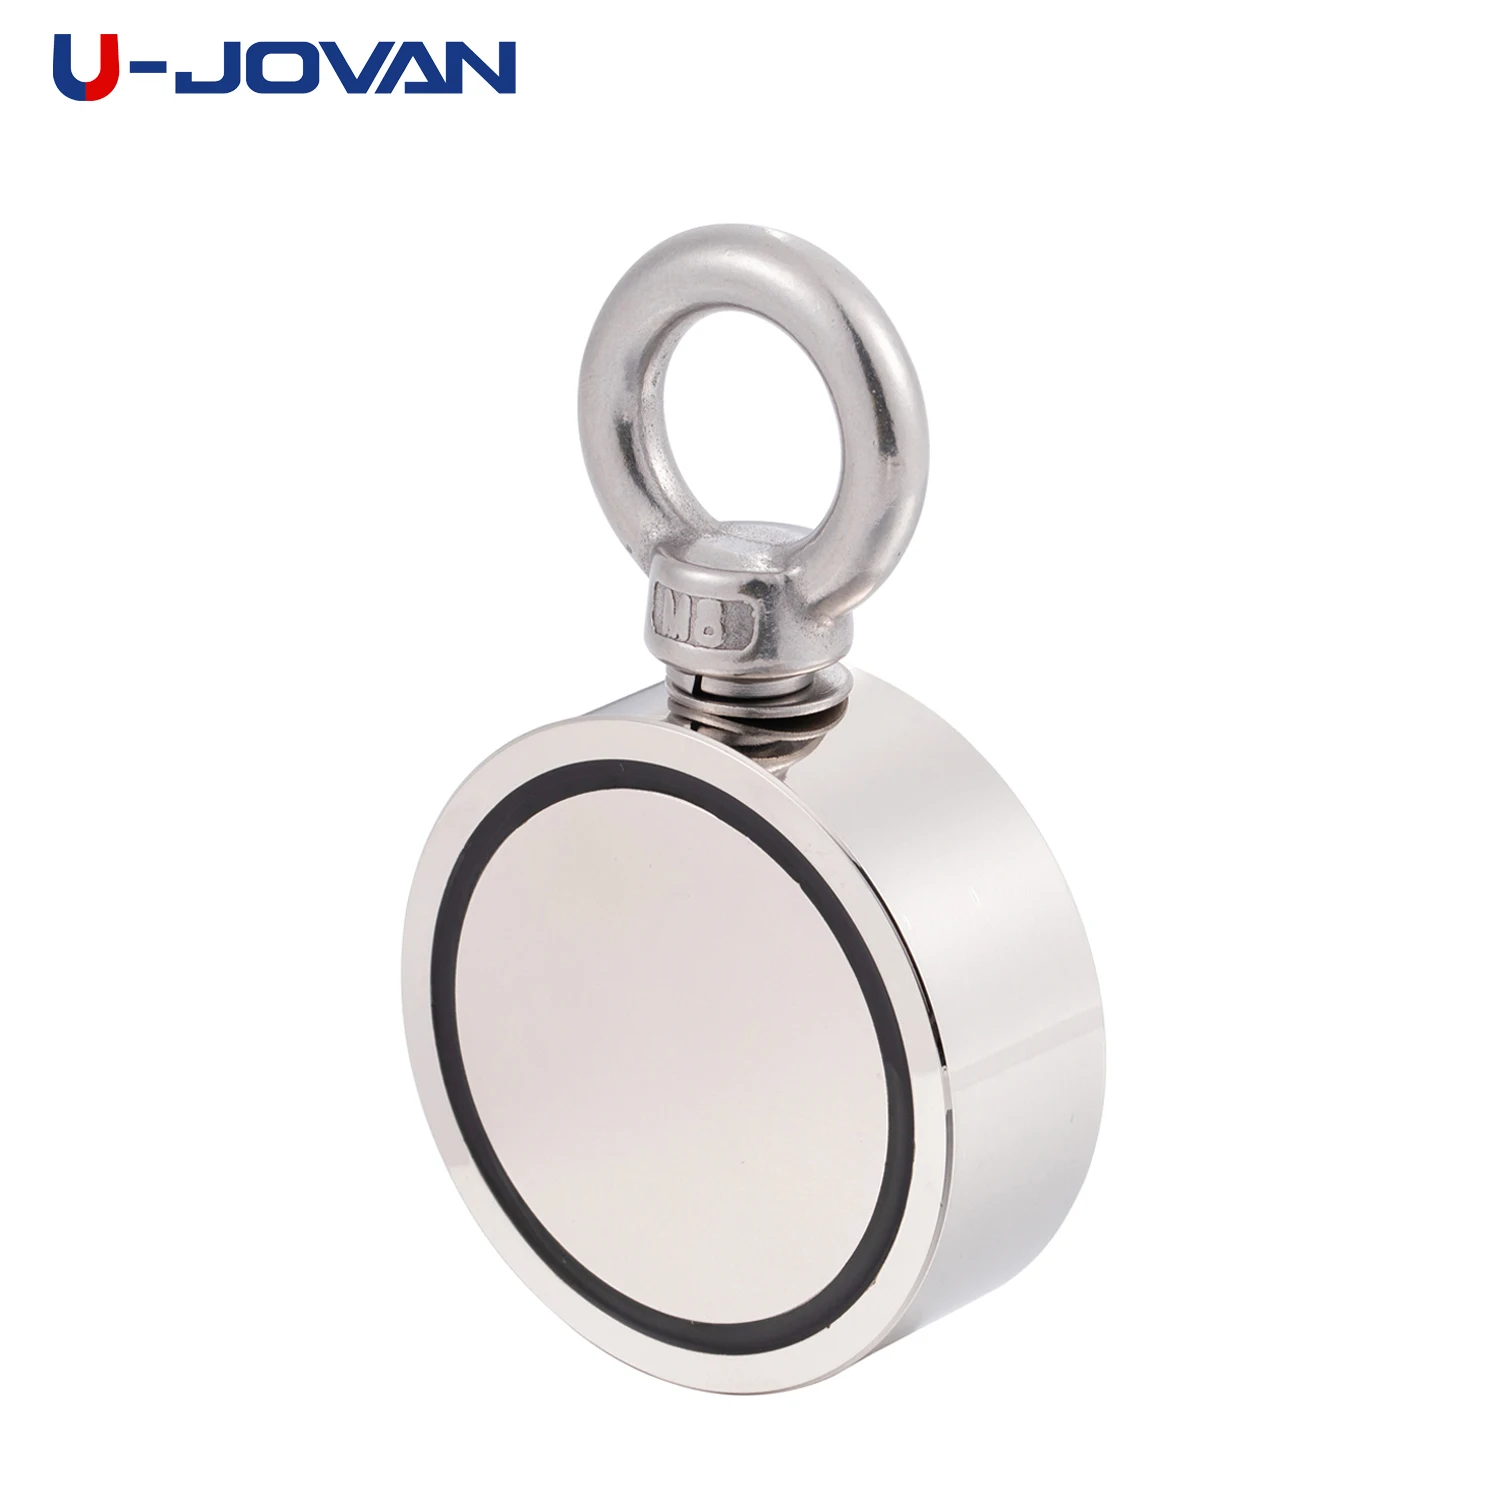 Strong Neodymium Magnet Double Sided Search Magnetic Hook Powerful Salvage Fishing Magnetic Stell Cup Holder D48mm